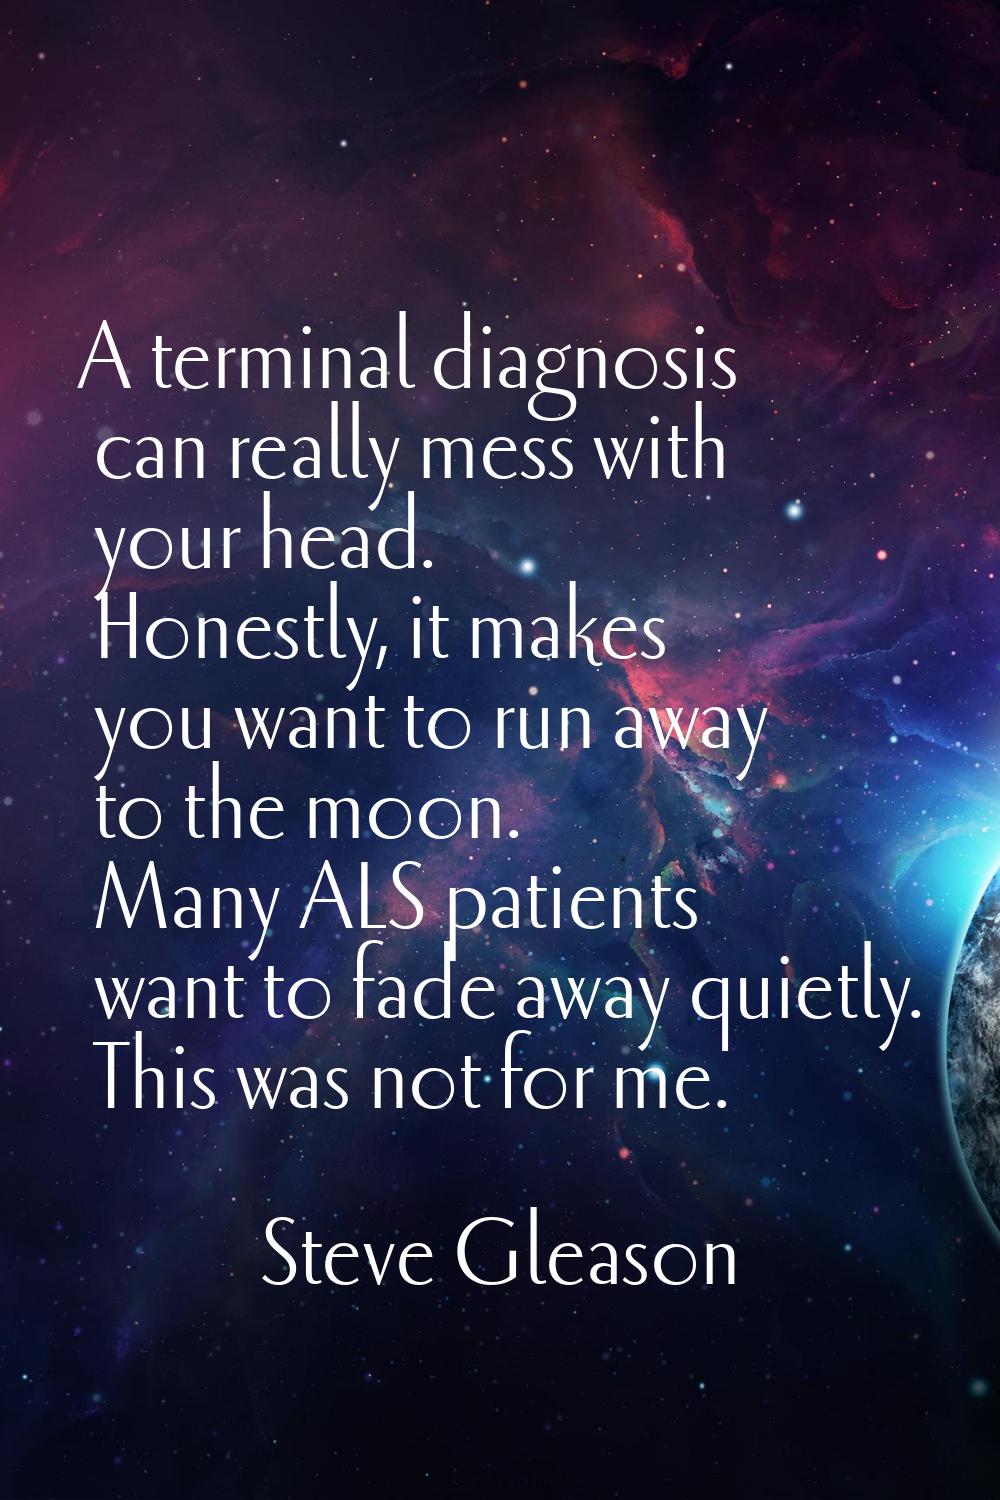 A terminal diagnosis can really mess with your head. Honestly, it makes you want to run away to the